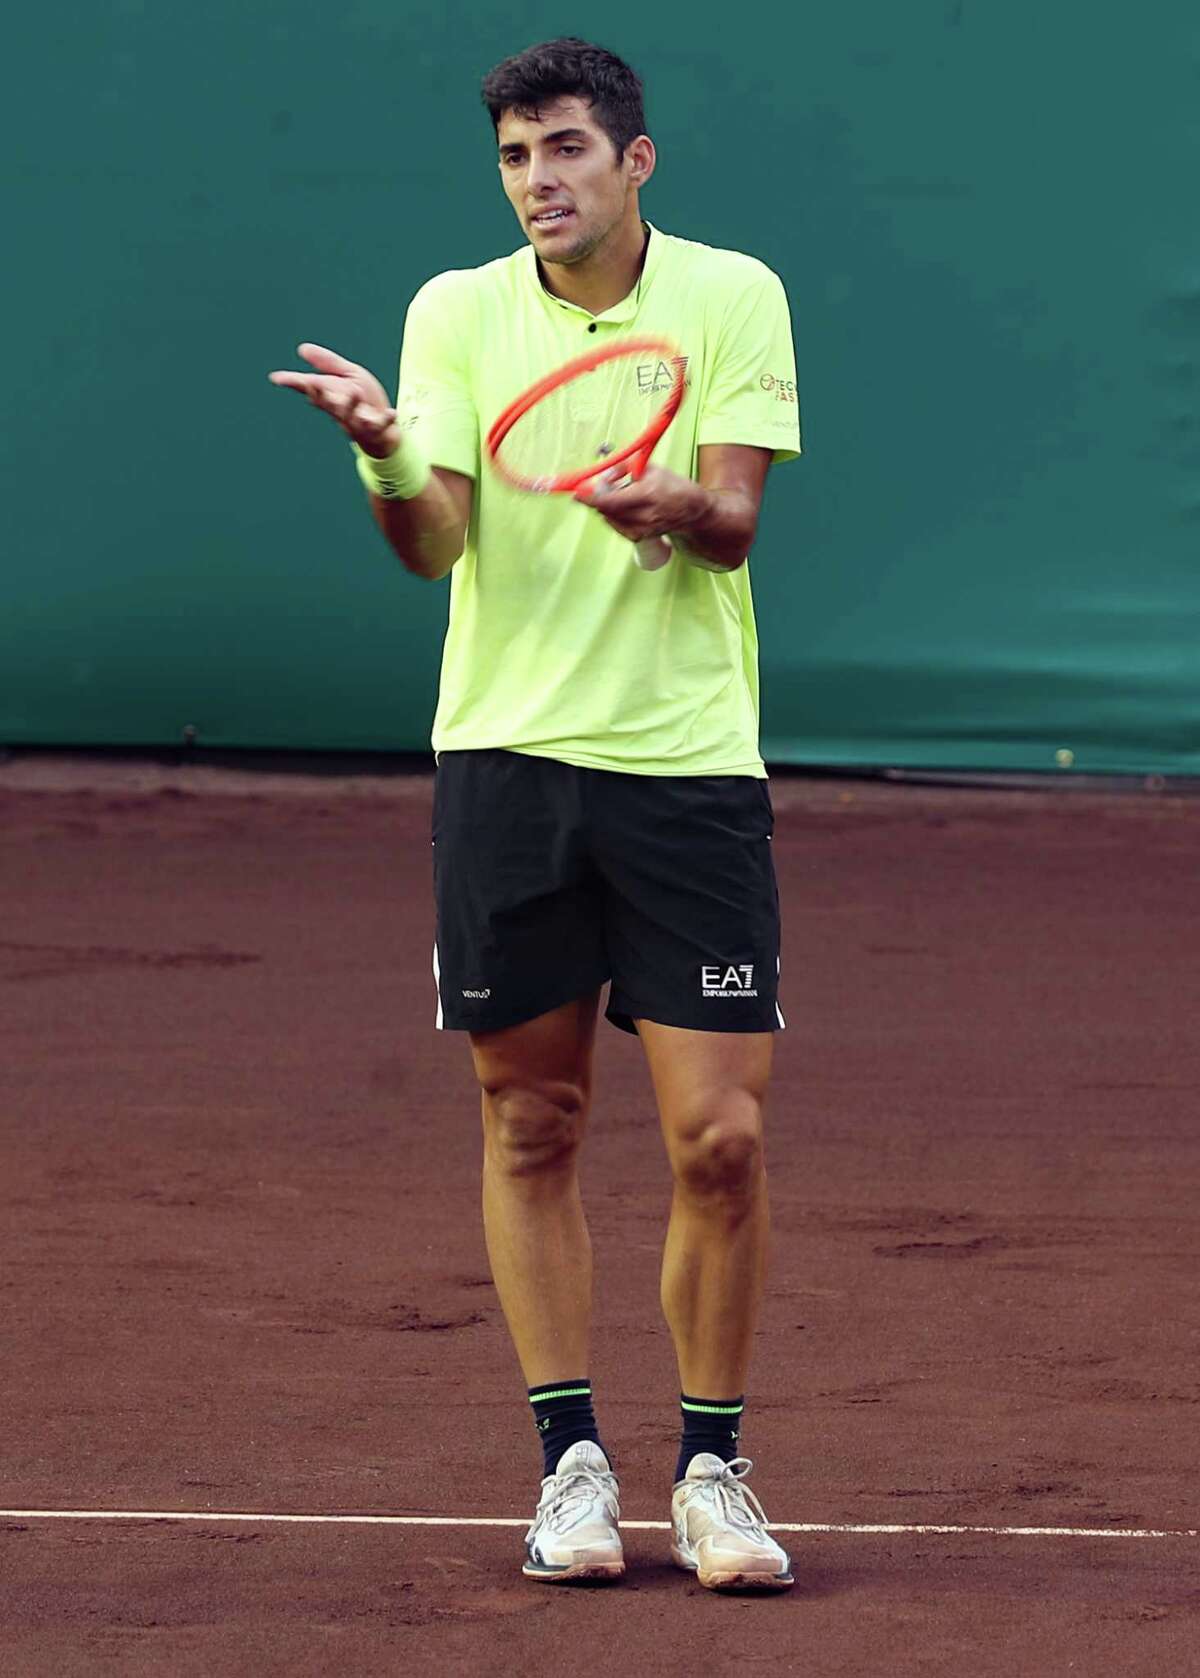 Christian Garin (CHI) reacts to a fault call during the first round of the Fayez Sarofim & Co. U.S. Men’s Clay Court Championship against Jack Sock, USA, at River Oaks Country Club in Houston on Tuesday, April 5, 2022.